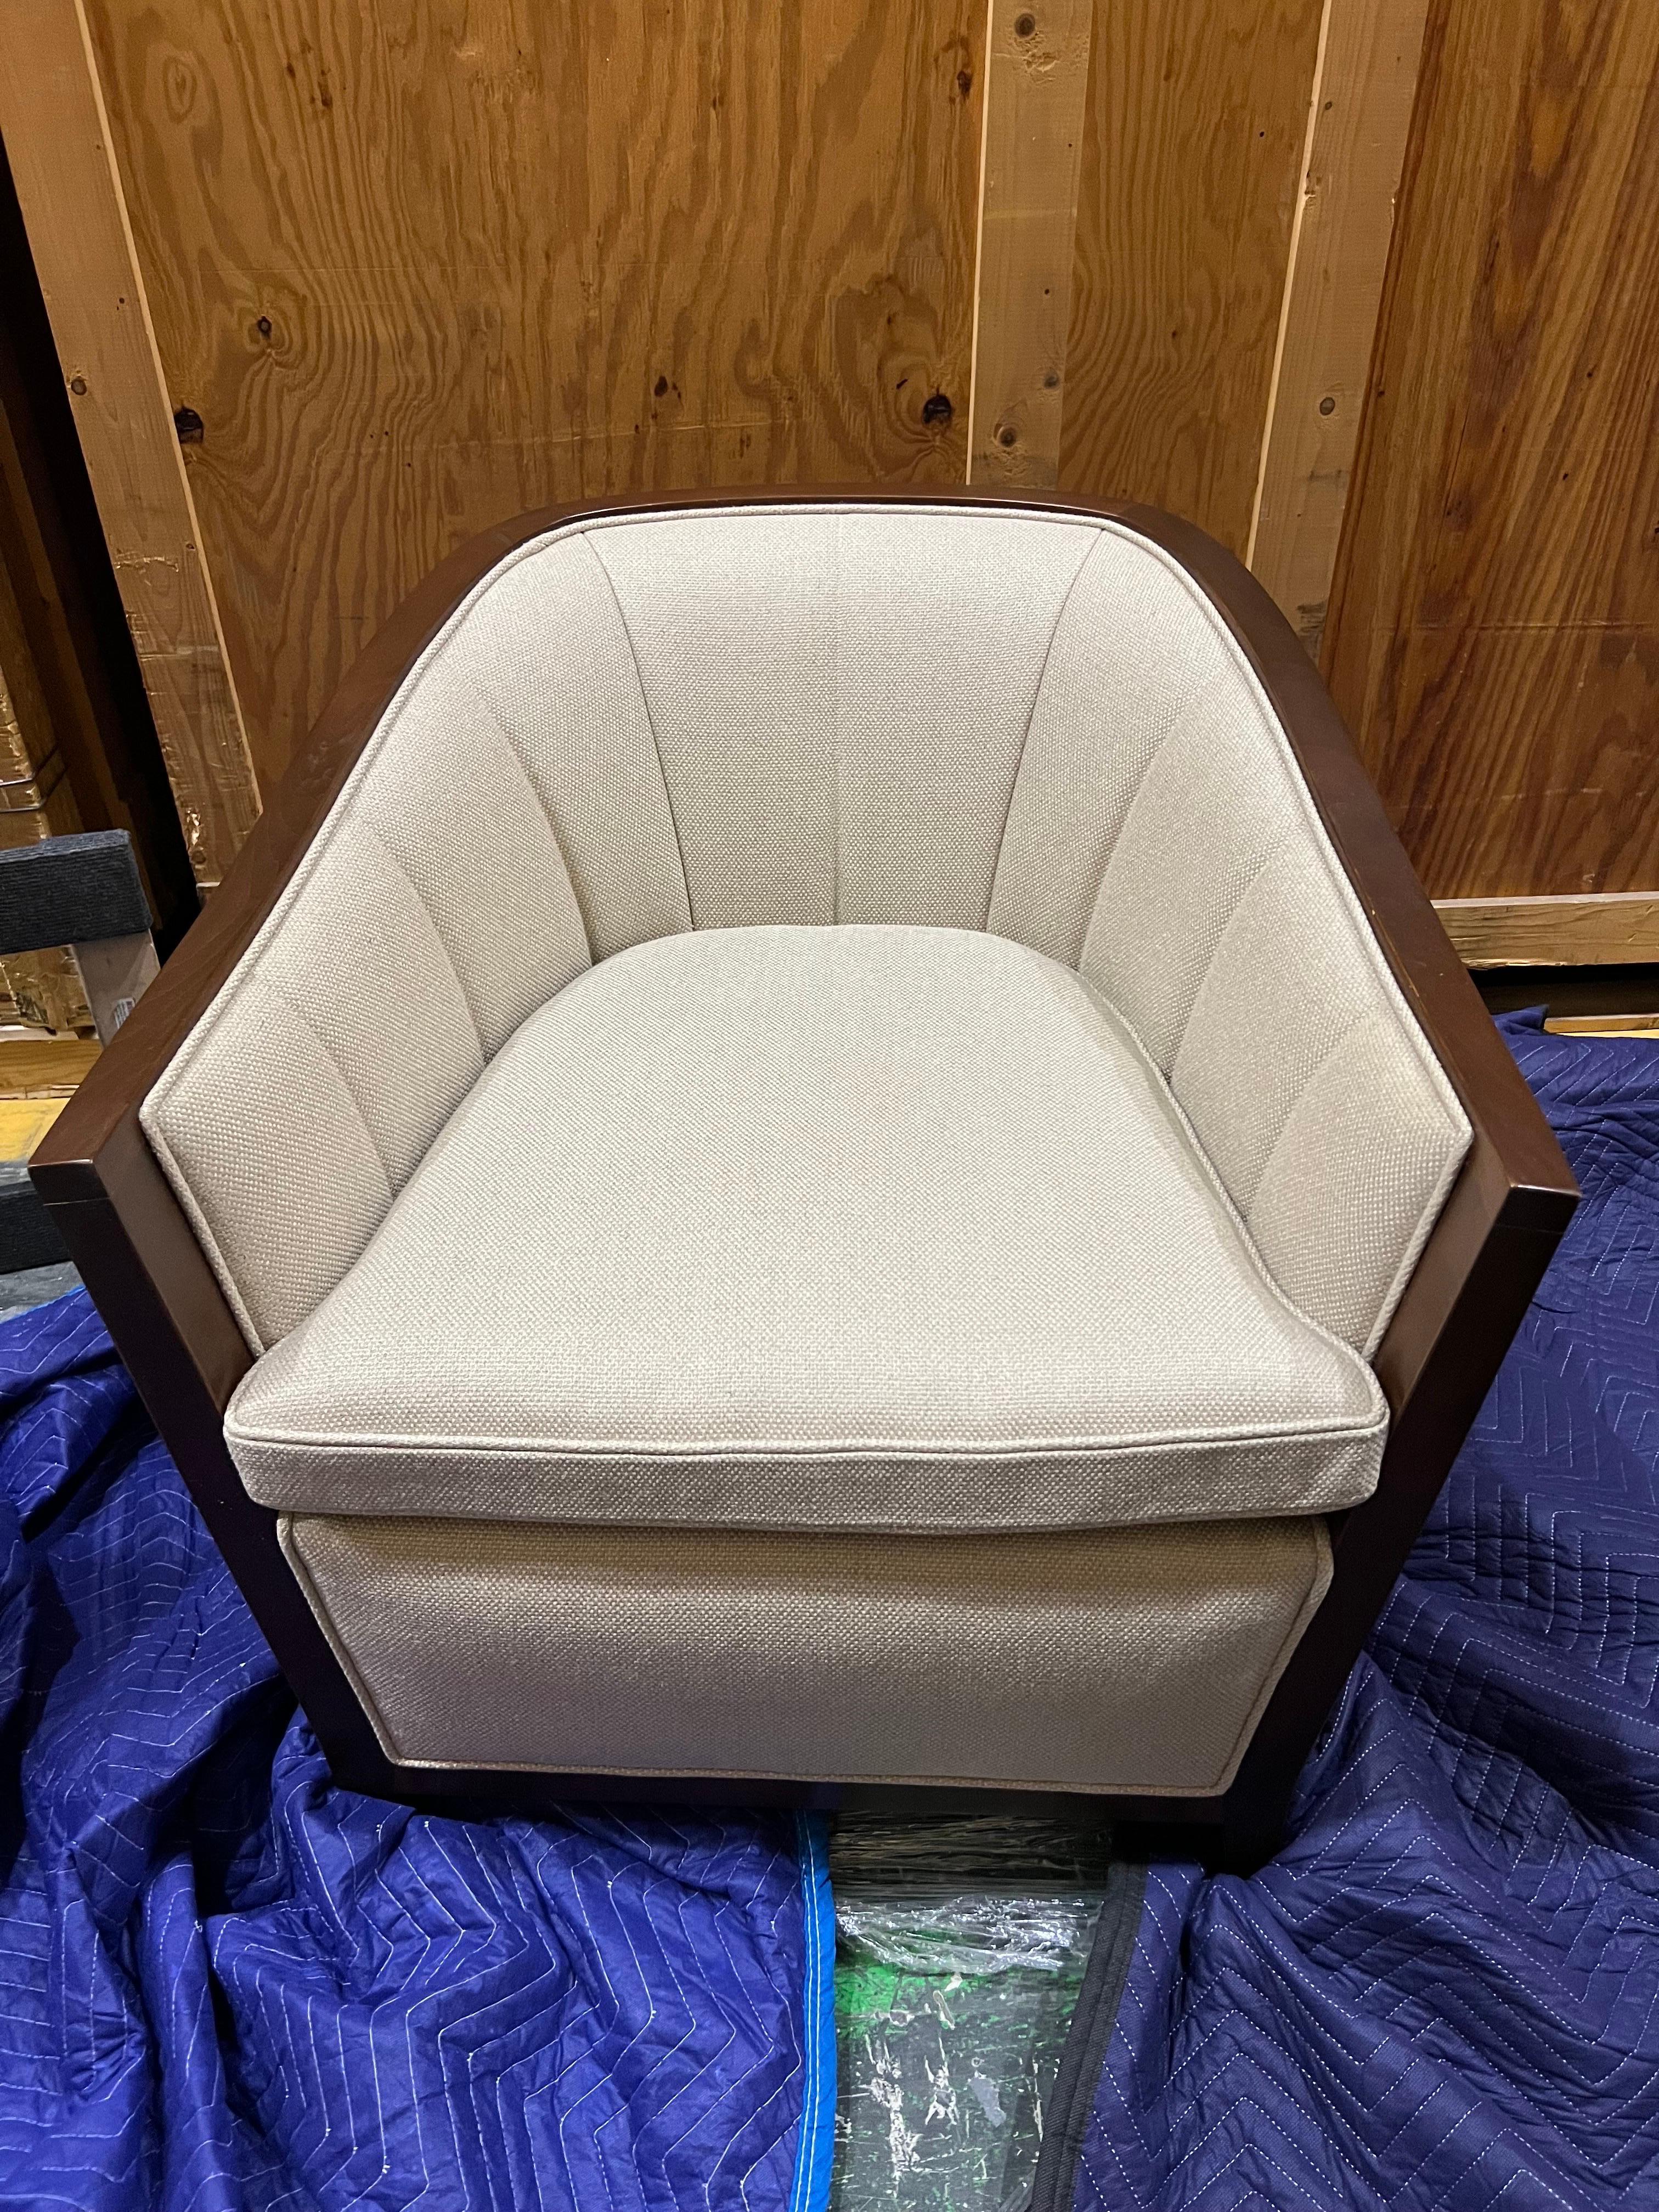 Pair of Bill Sofield ‘Layton’ Lounge Chairs #6359 for Baker 3